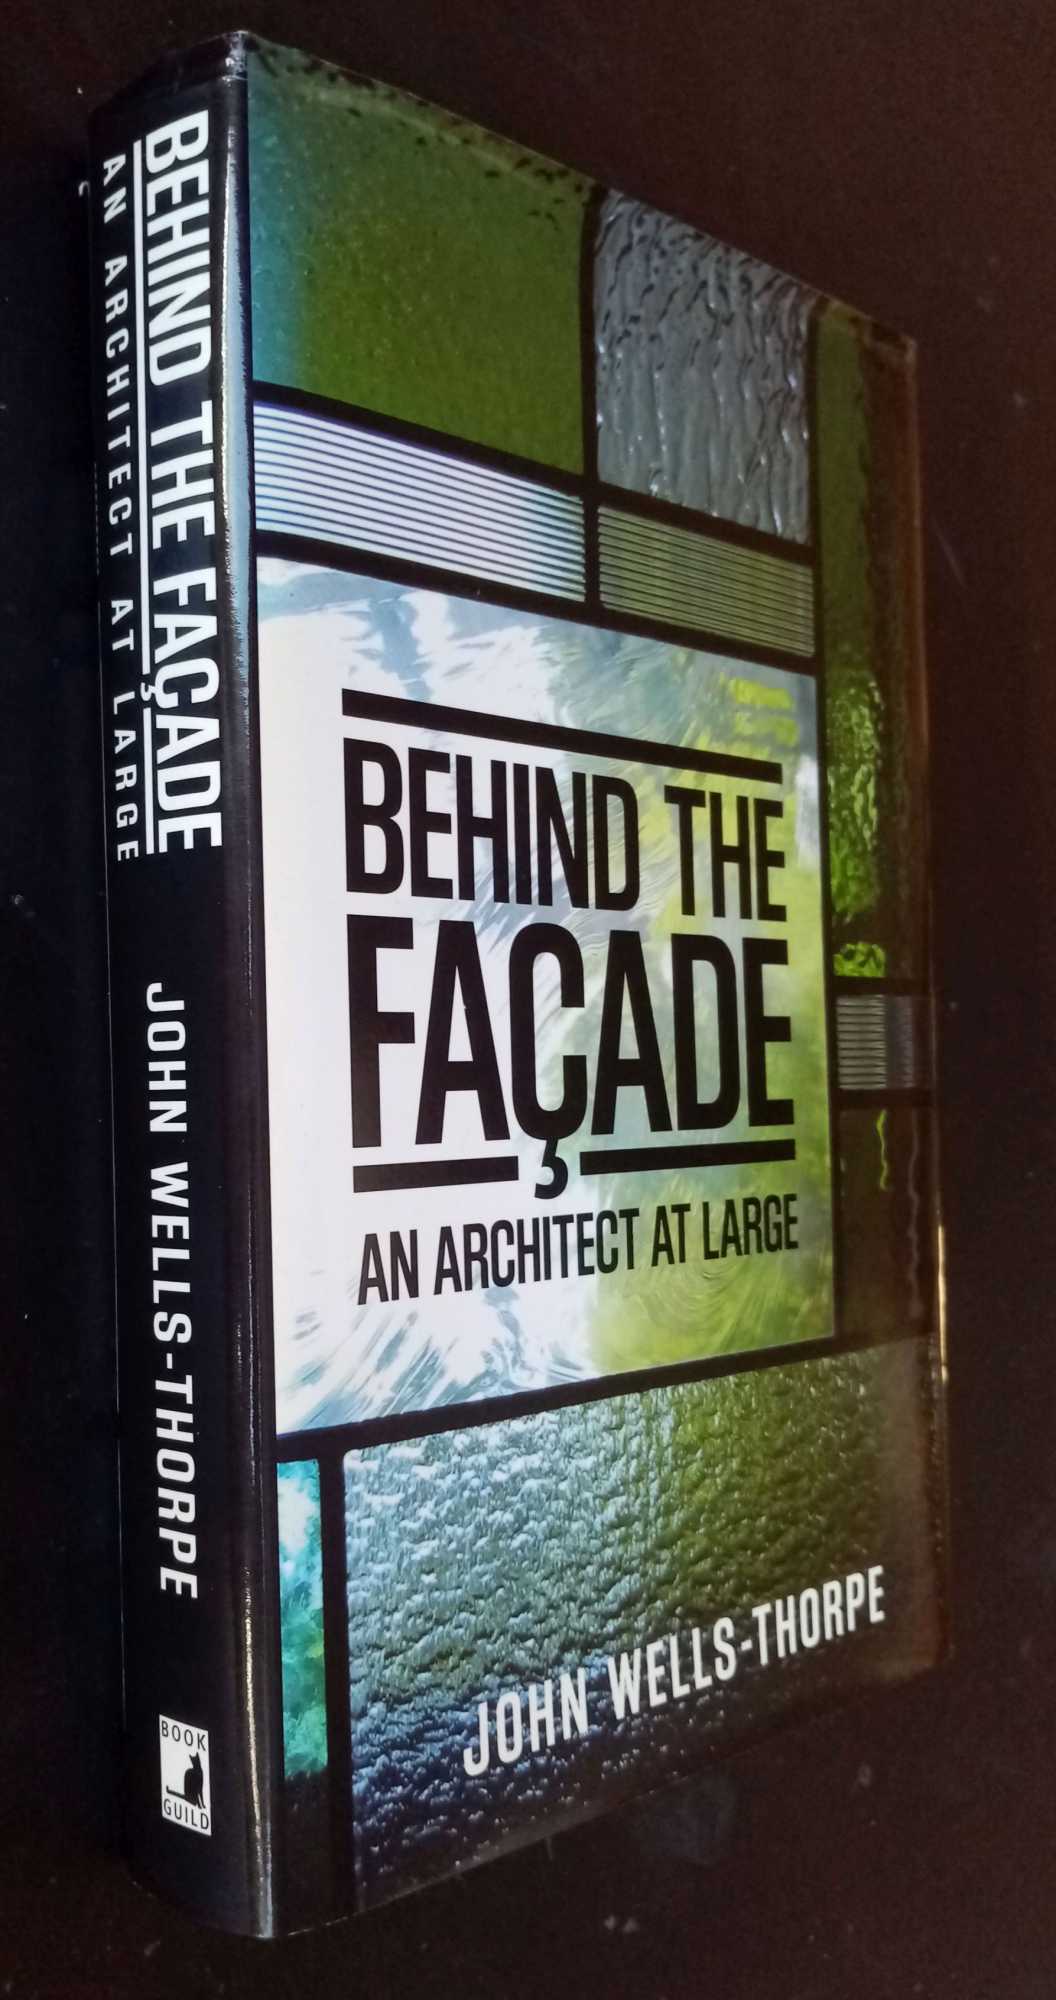 John Wells-Thorpe - Behind the Facade: An Architect at Large  SIGNED/Inscribed